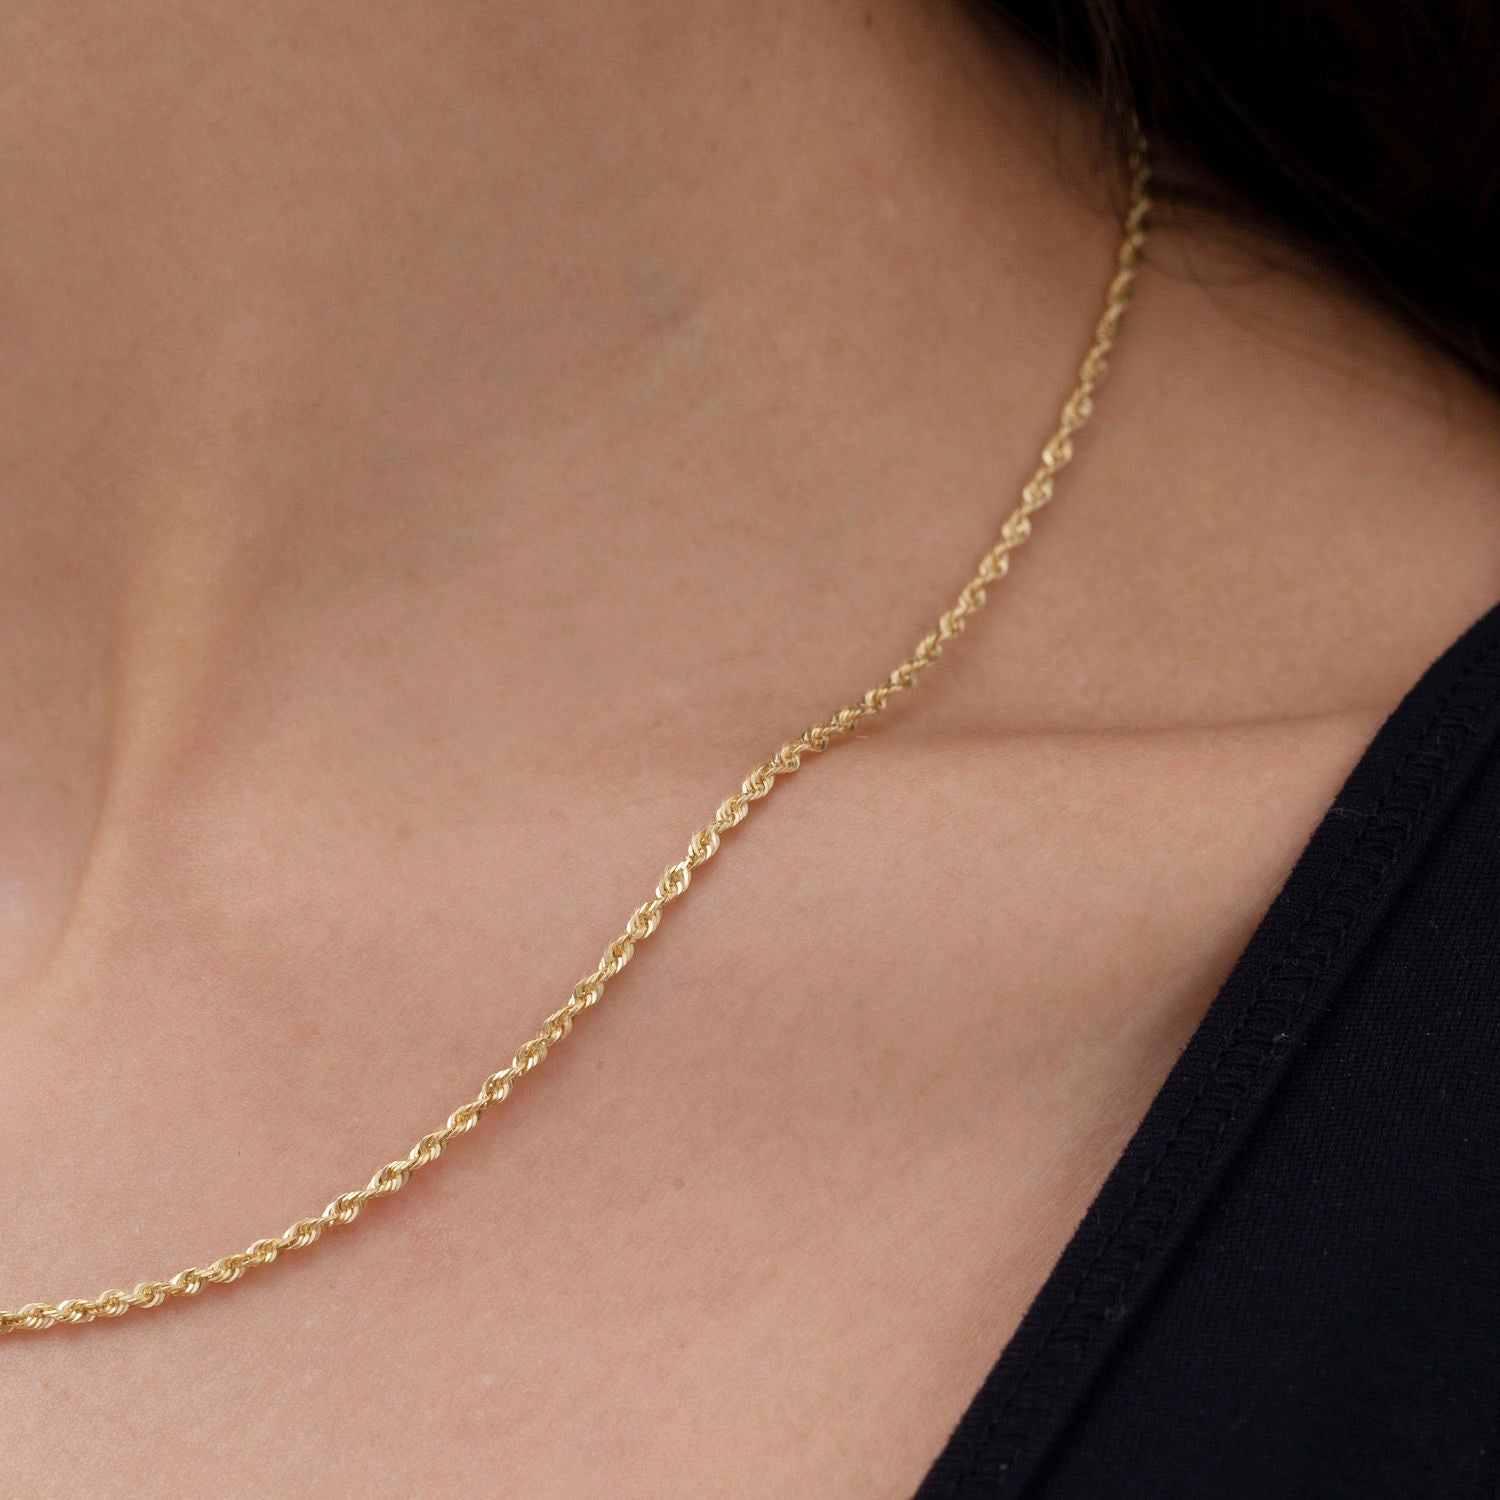 14K SOLID GOLD ROPE NECKLACE